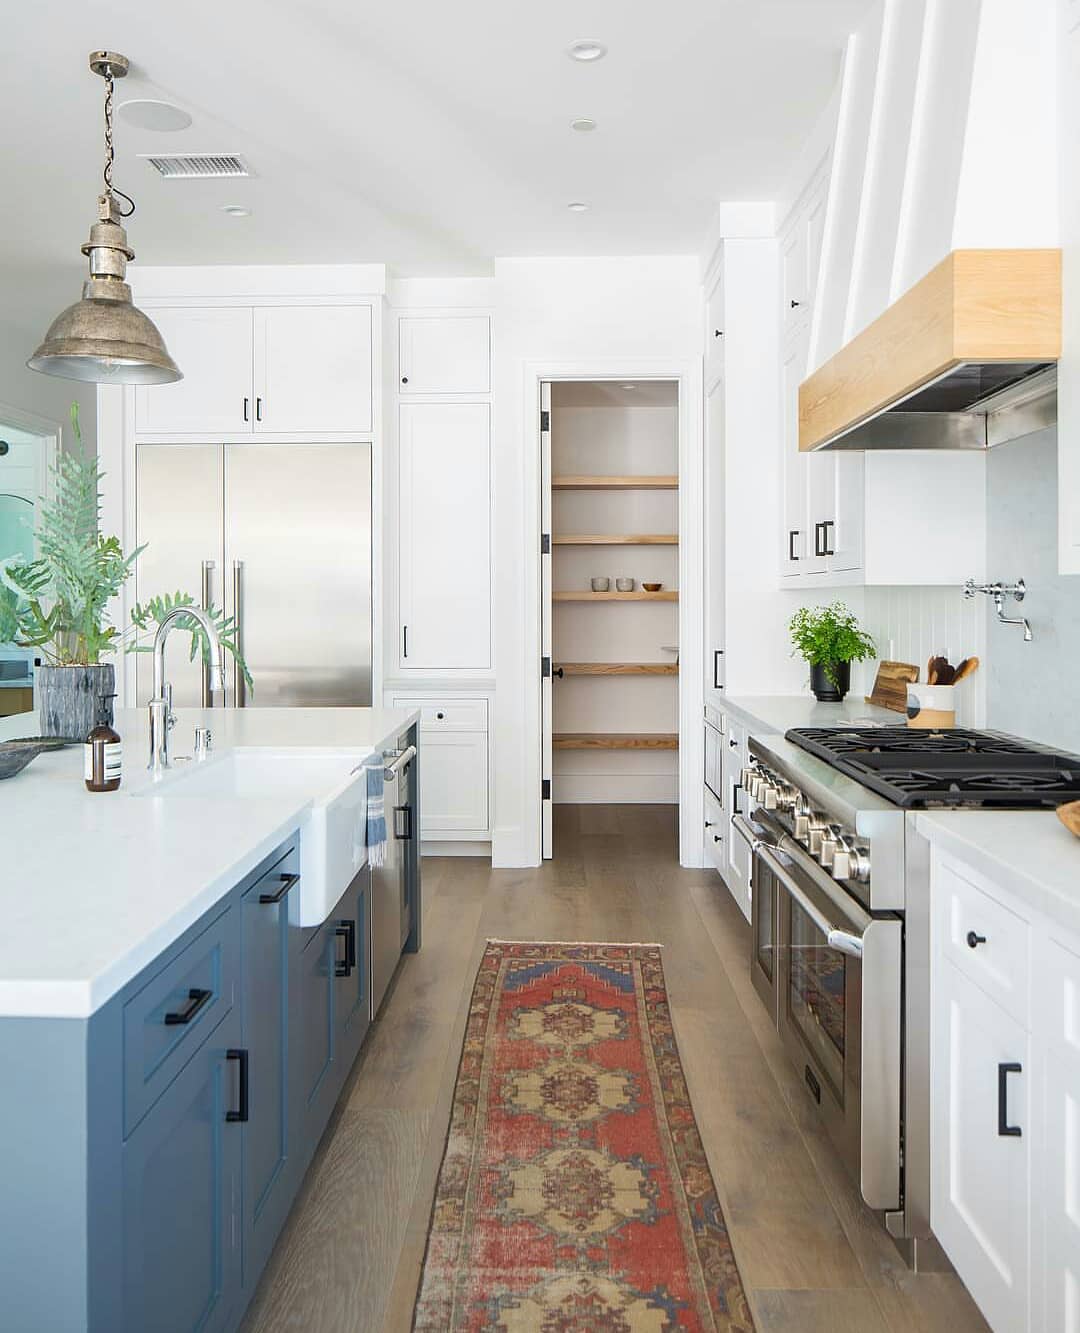 Contemporary kitchen with Thermador appliances. Photo by Instagram user @appliancestudio